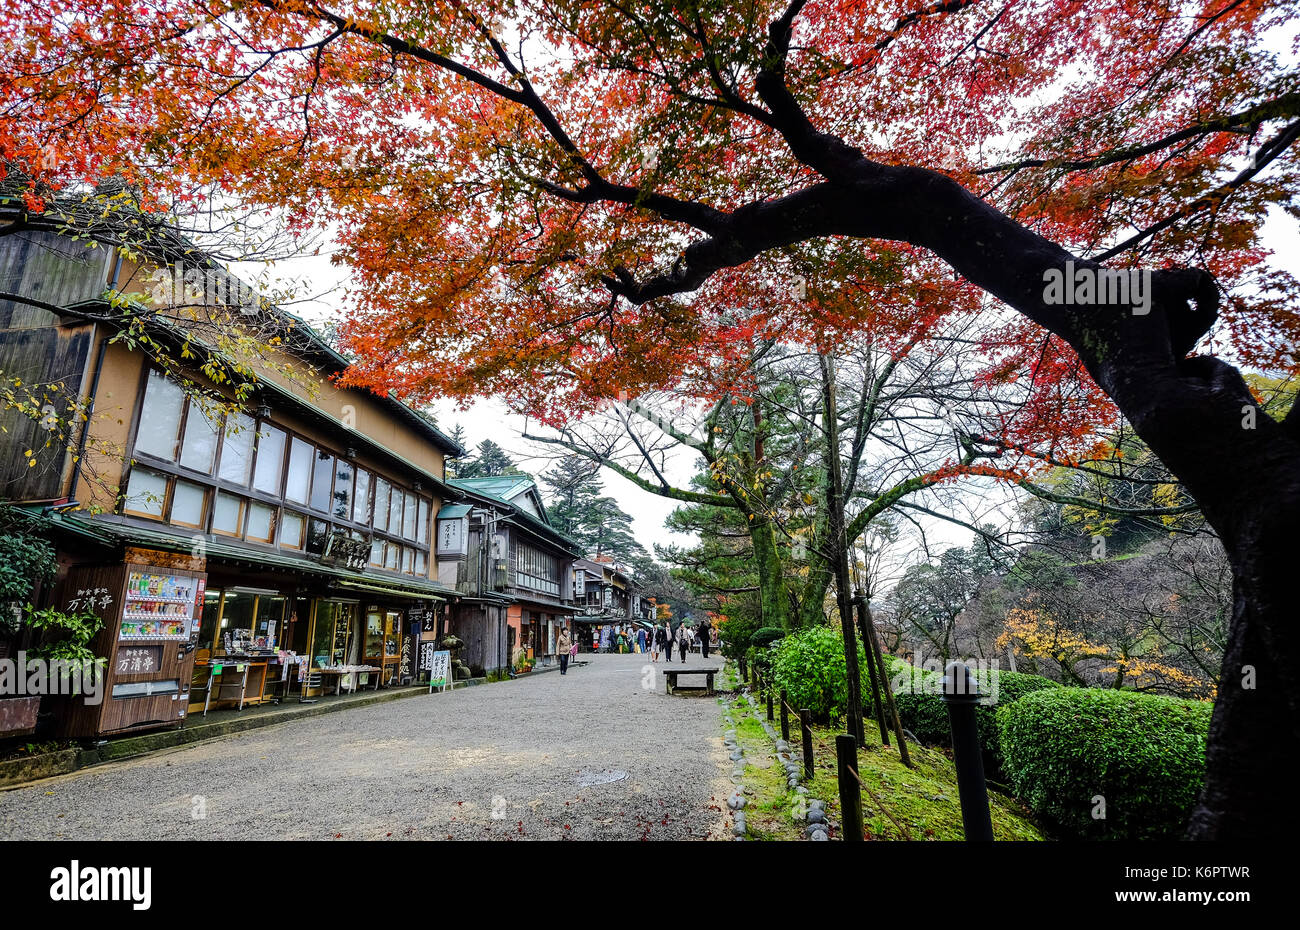 Kyoto, Japan - Nov 19, 2016. Gion Old Street at autumn in Kyoto, Japan. Kyoto served as Japan capital and the emperor residence from 794 until 1868. Stock Photo